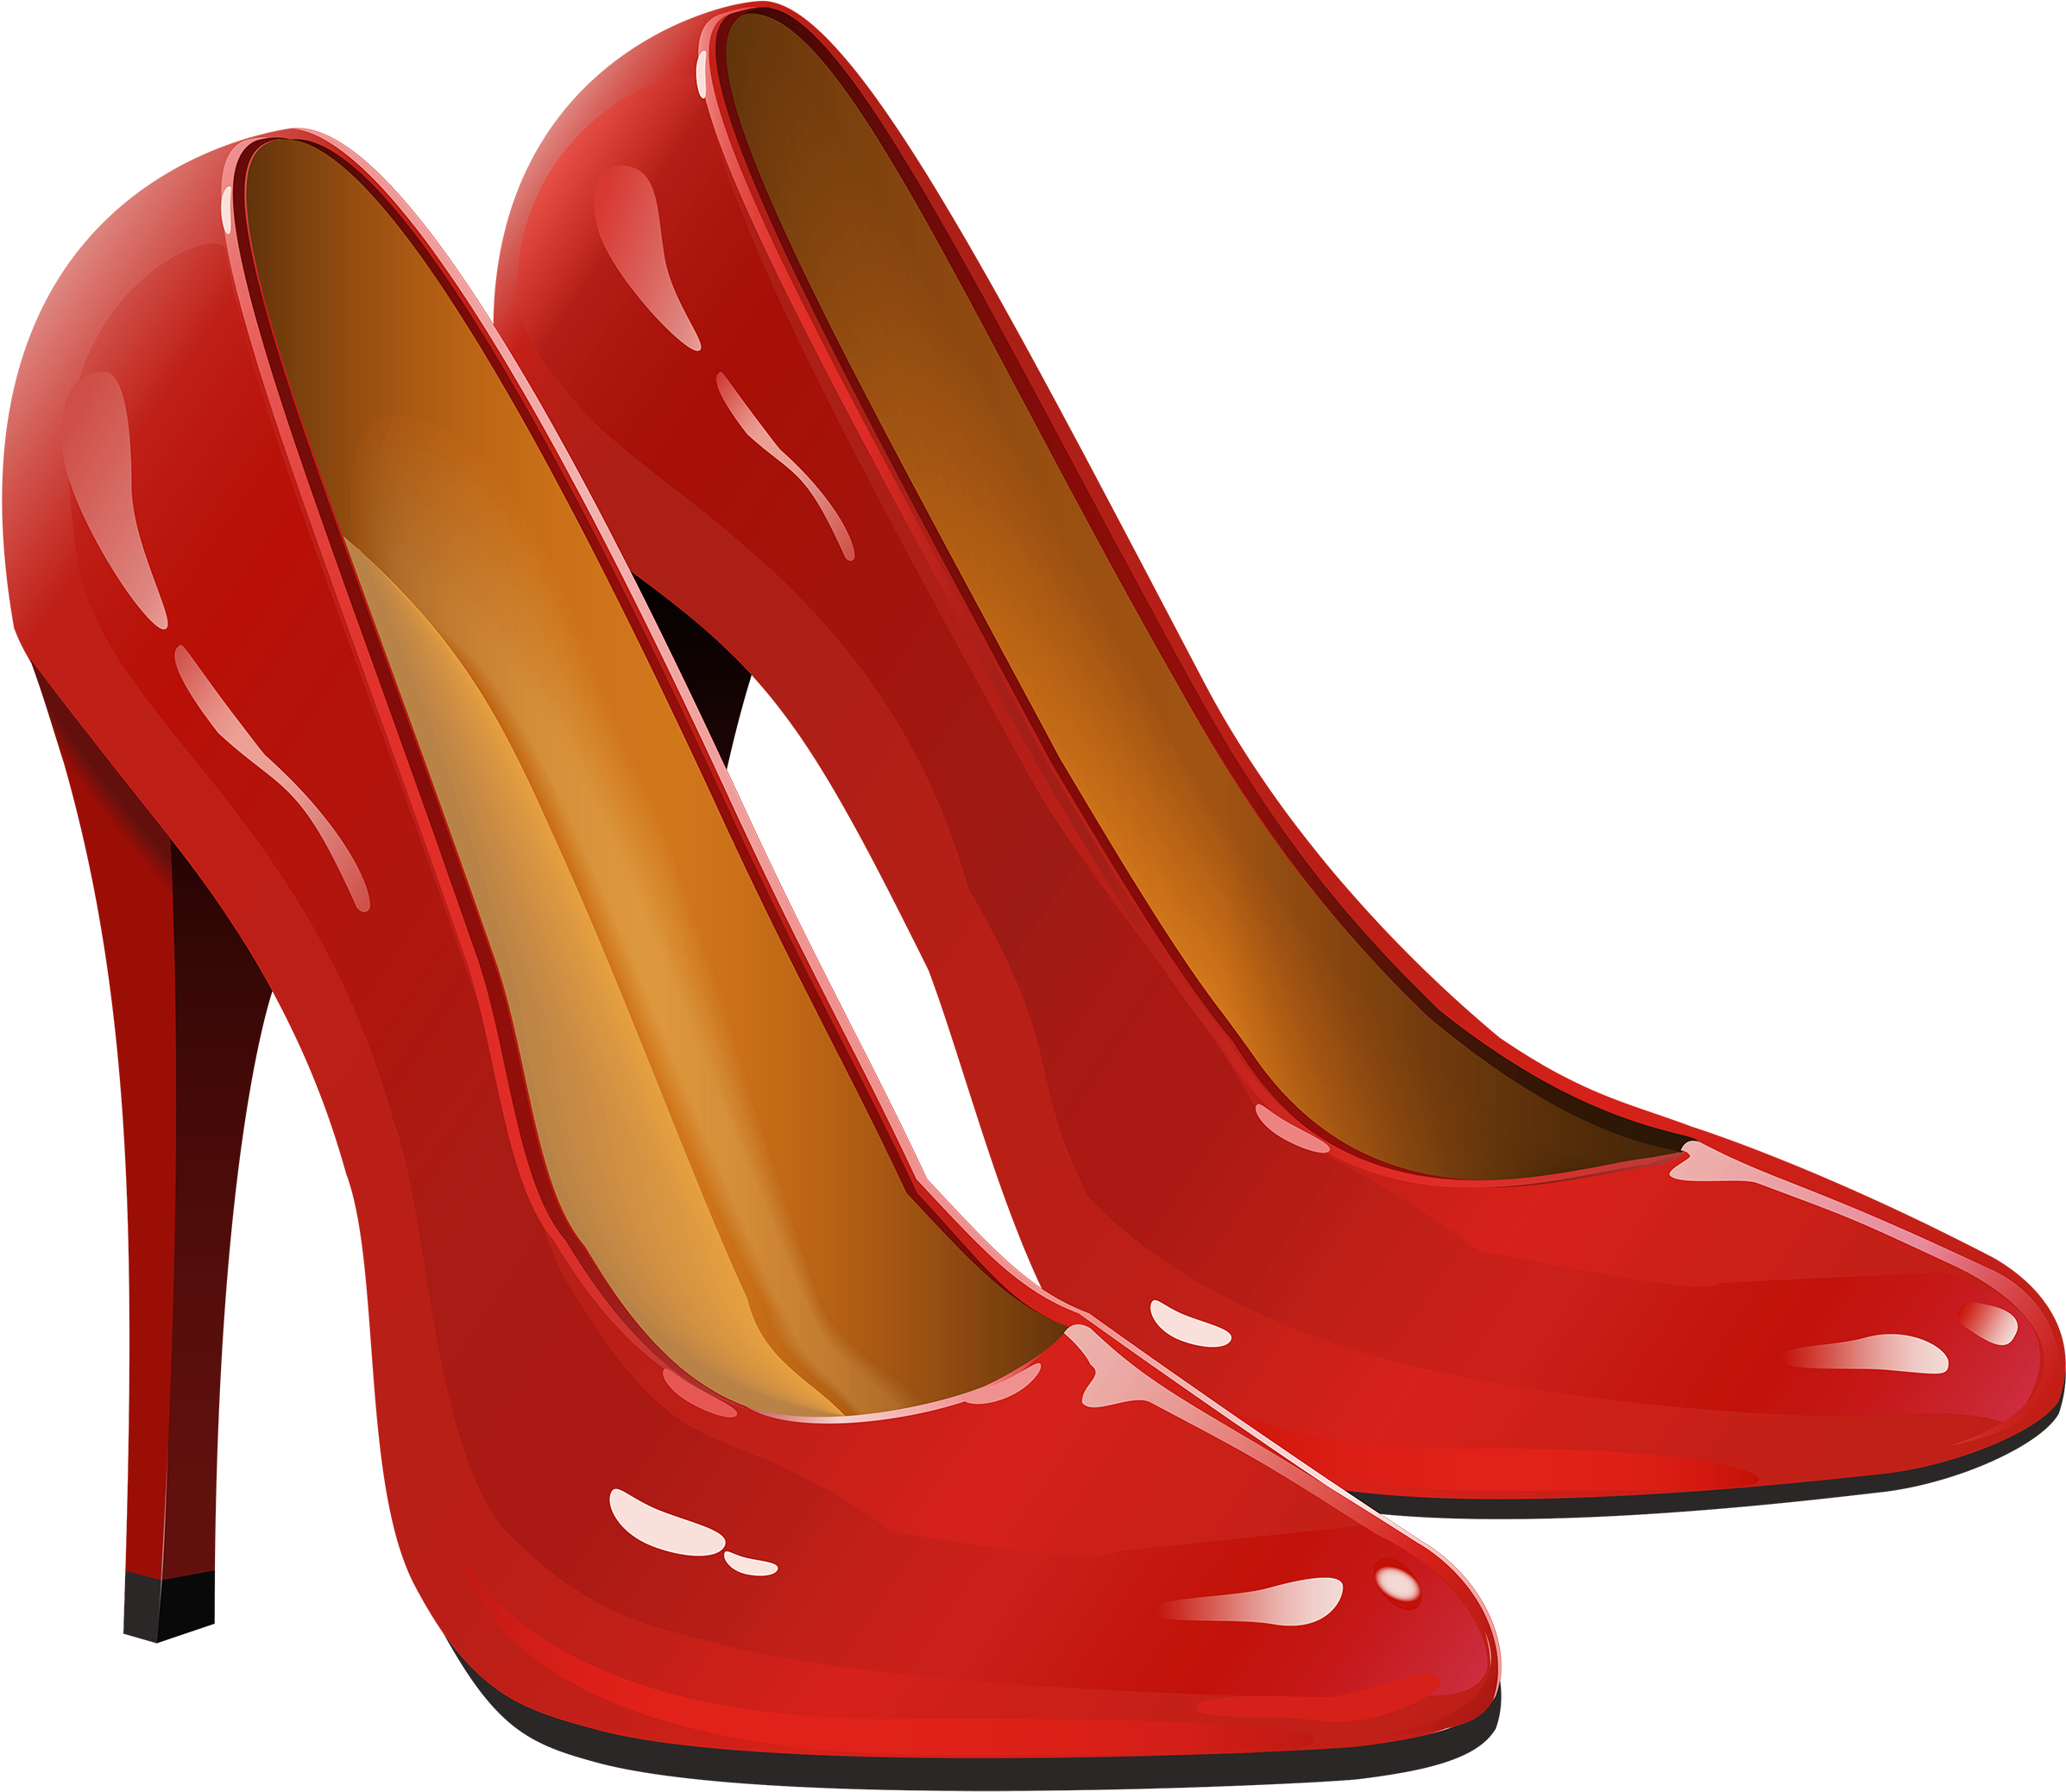 Red Women Shoes Png Transparent Image Clipart Shoes